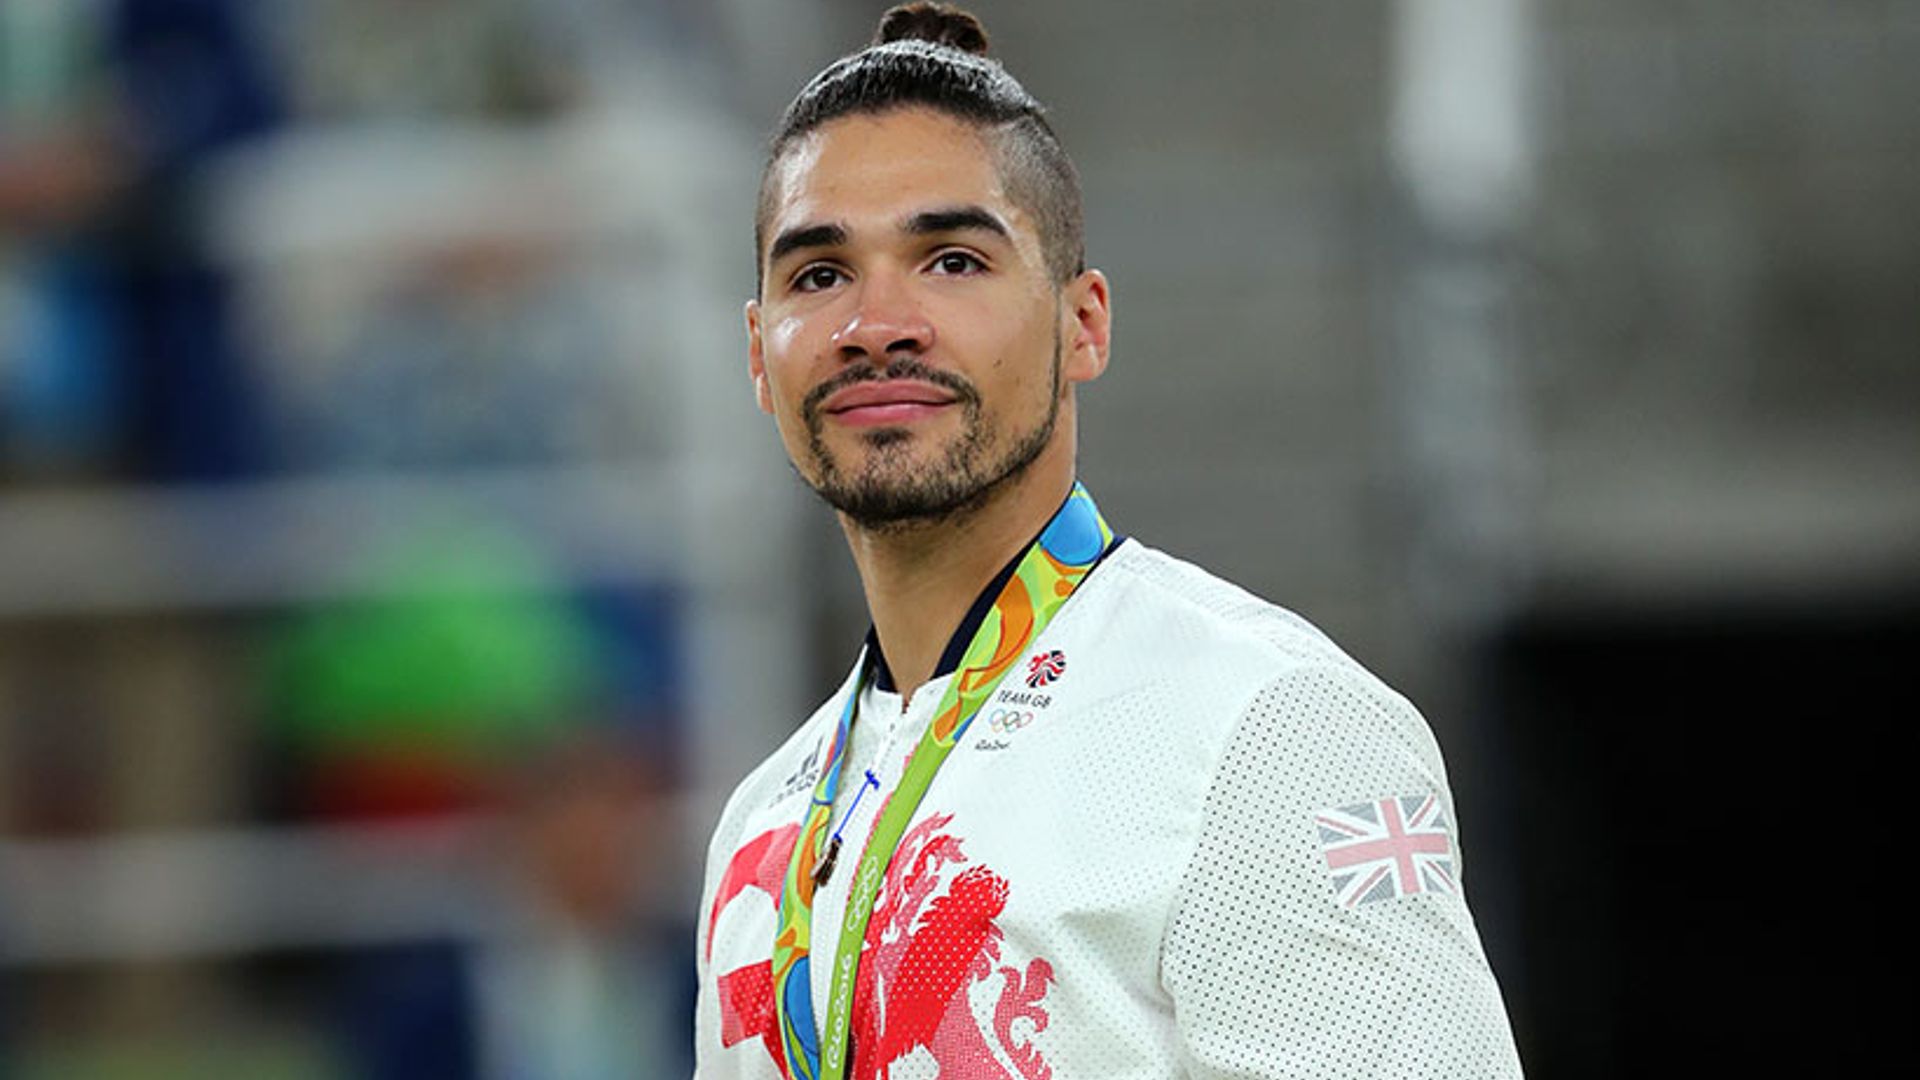 Louis Smith banned by British Gymnastics over offensive leaked video